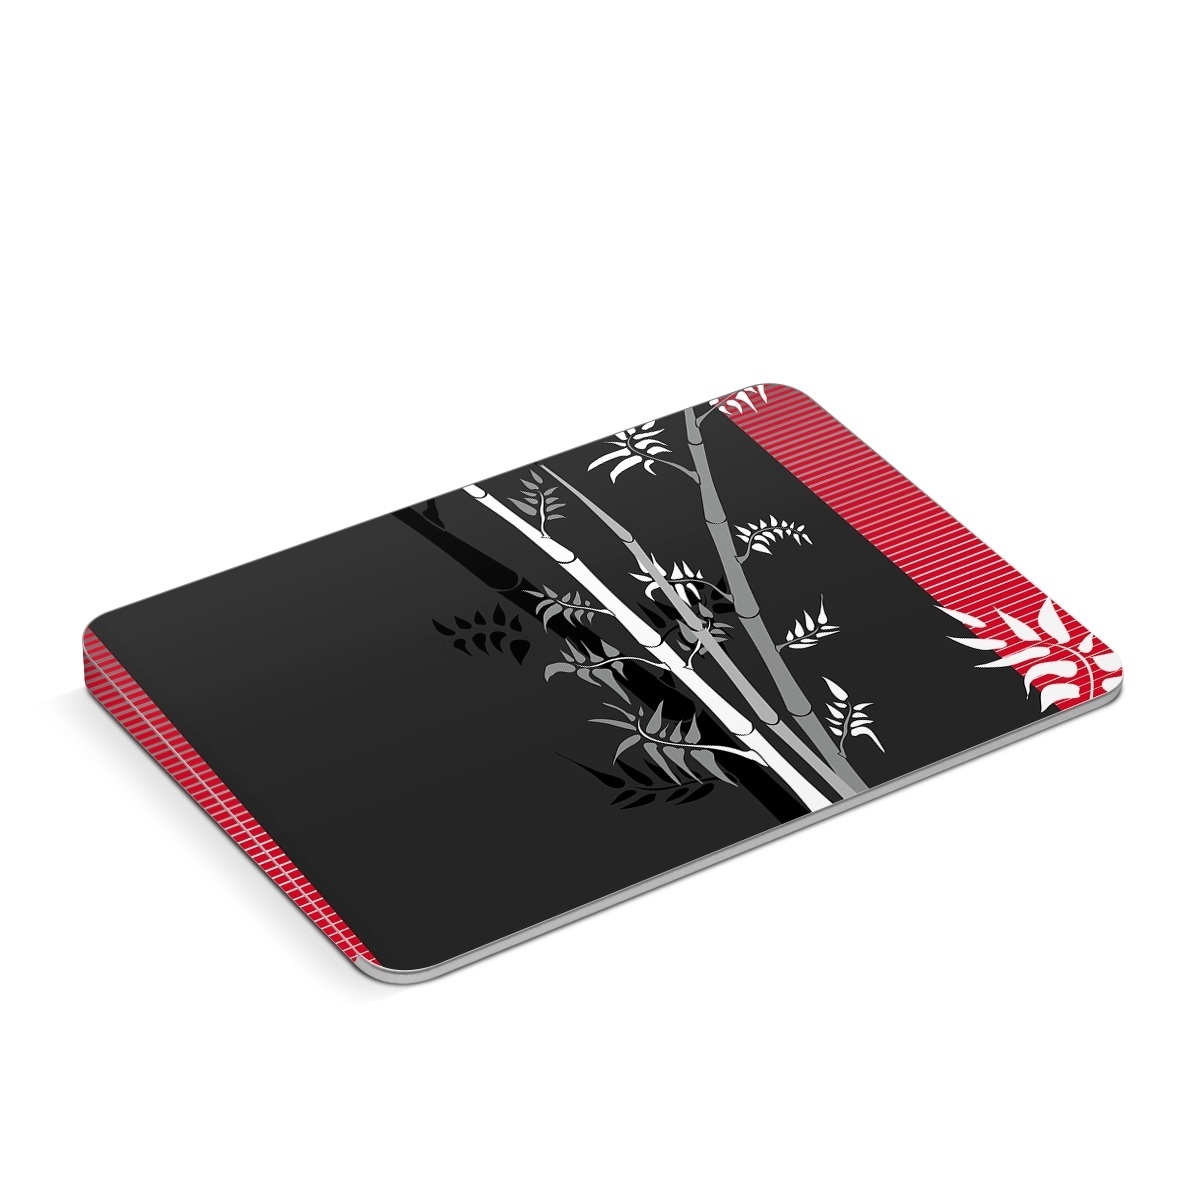 Apple Magic Trackpad Skin design of Tree, Branch, Plant, Graphic design, Bamboo, Illustration, Plant stem, Black-and-white, with black, red, gray, white colors